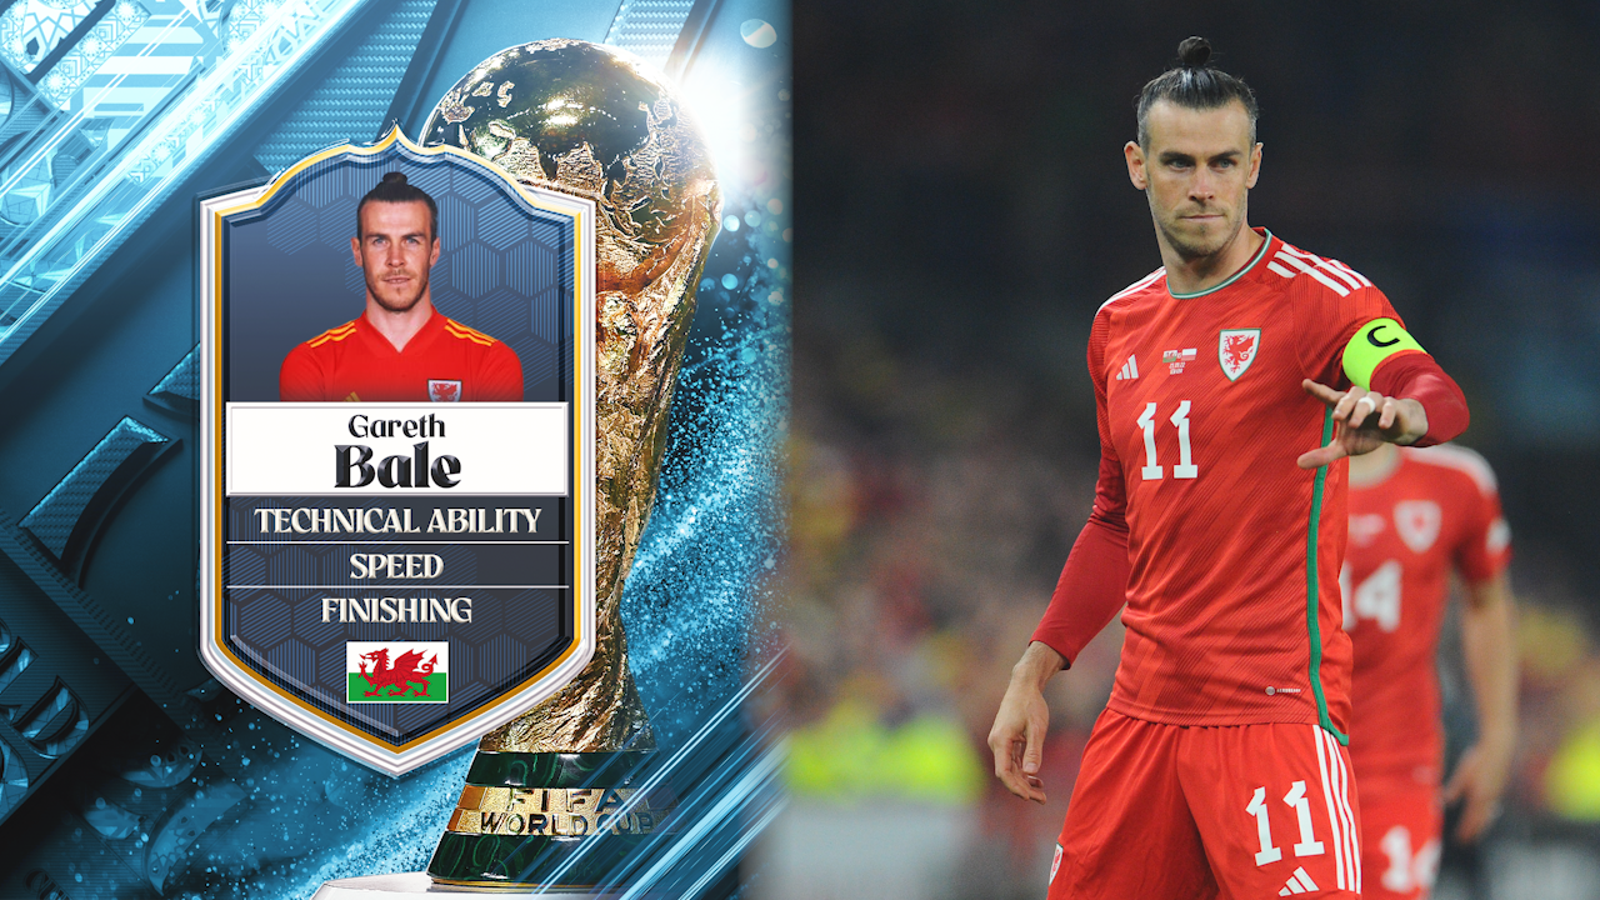 Top 50 World Cup players: Gareth Bale at number 42